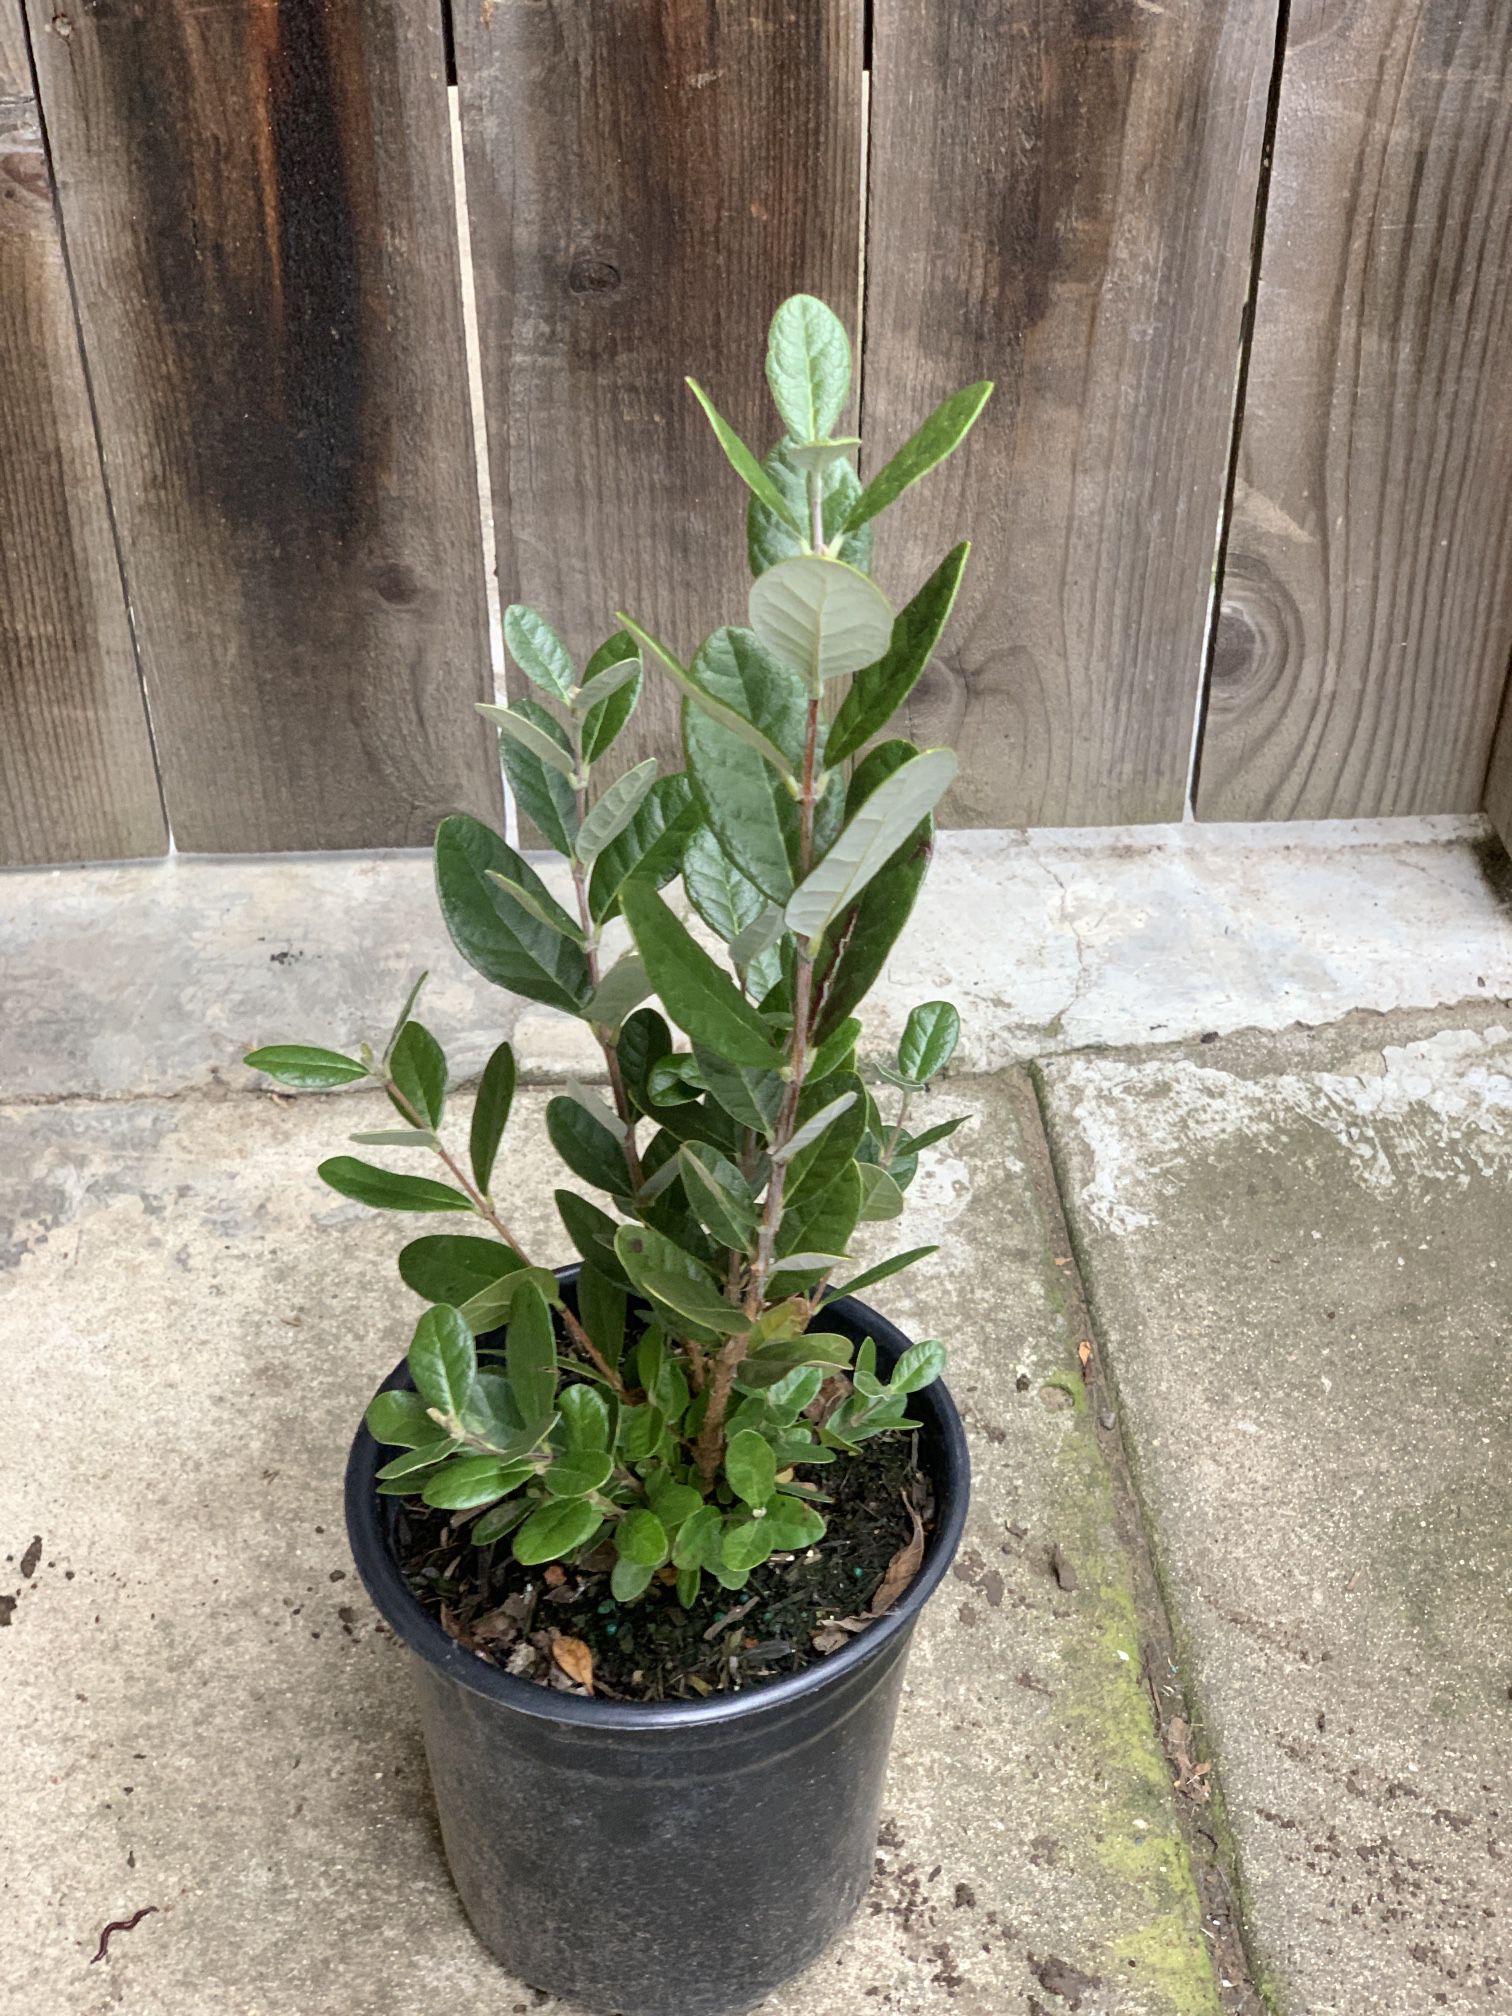 $25 Feijoa Sellowiana Pineapple Guava Live Fruit Tree Plant Bush Shrub One Gallon Pot approximately 1 to 2 ft tall  CASH ONLY 